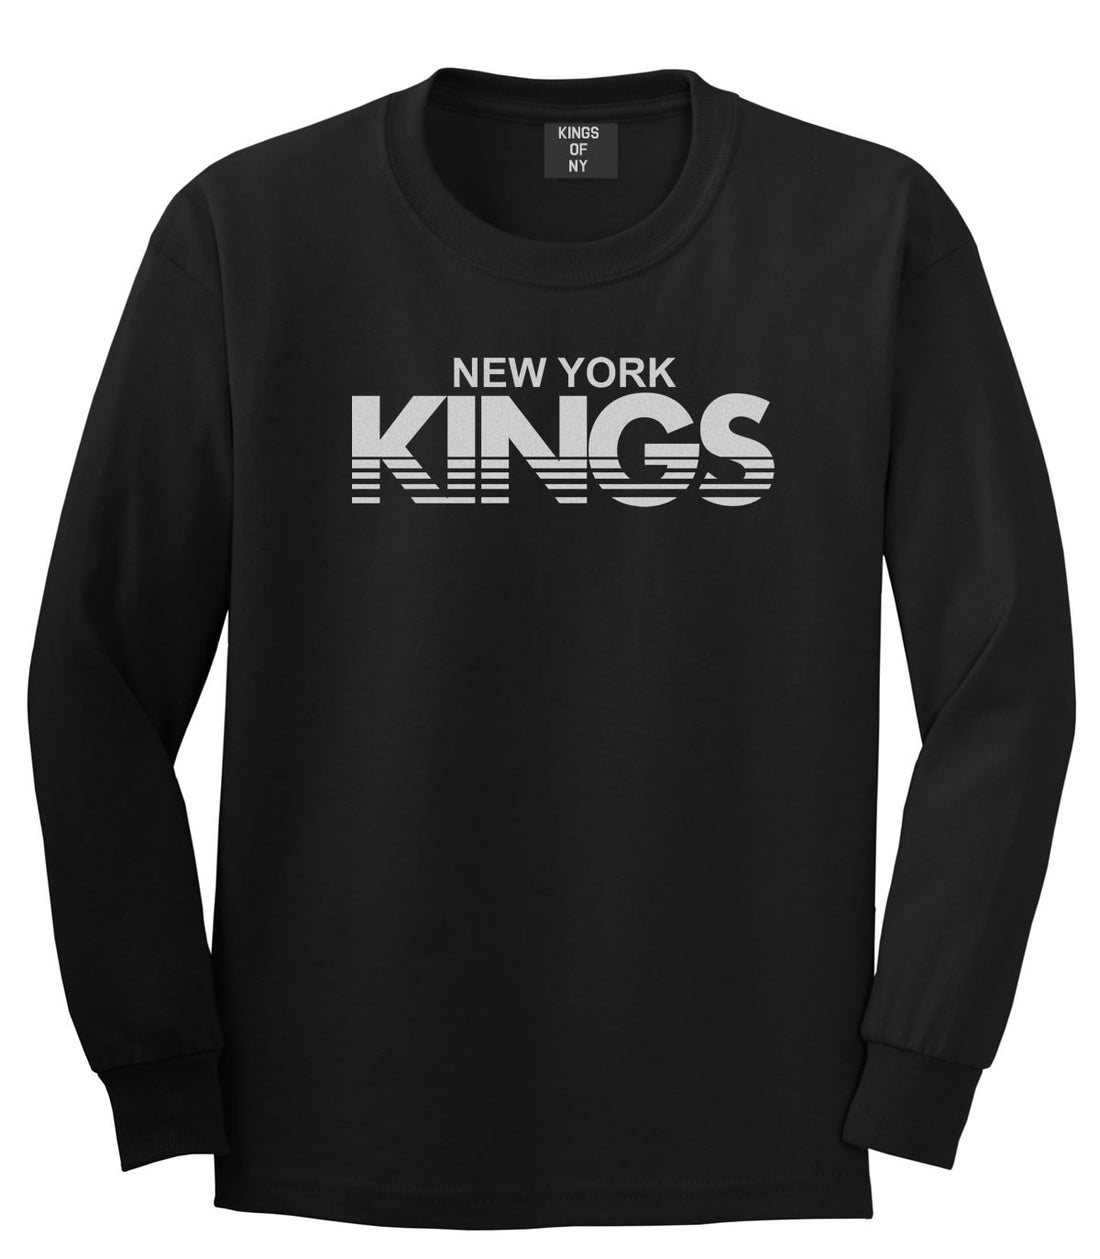 New York Kings Racing Style Boys Kids Long Sleeve T-Shirt in Black by Kings Of NY